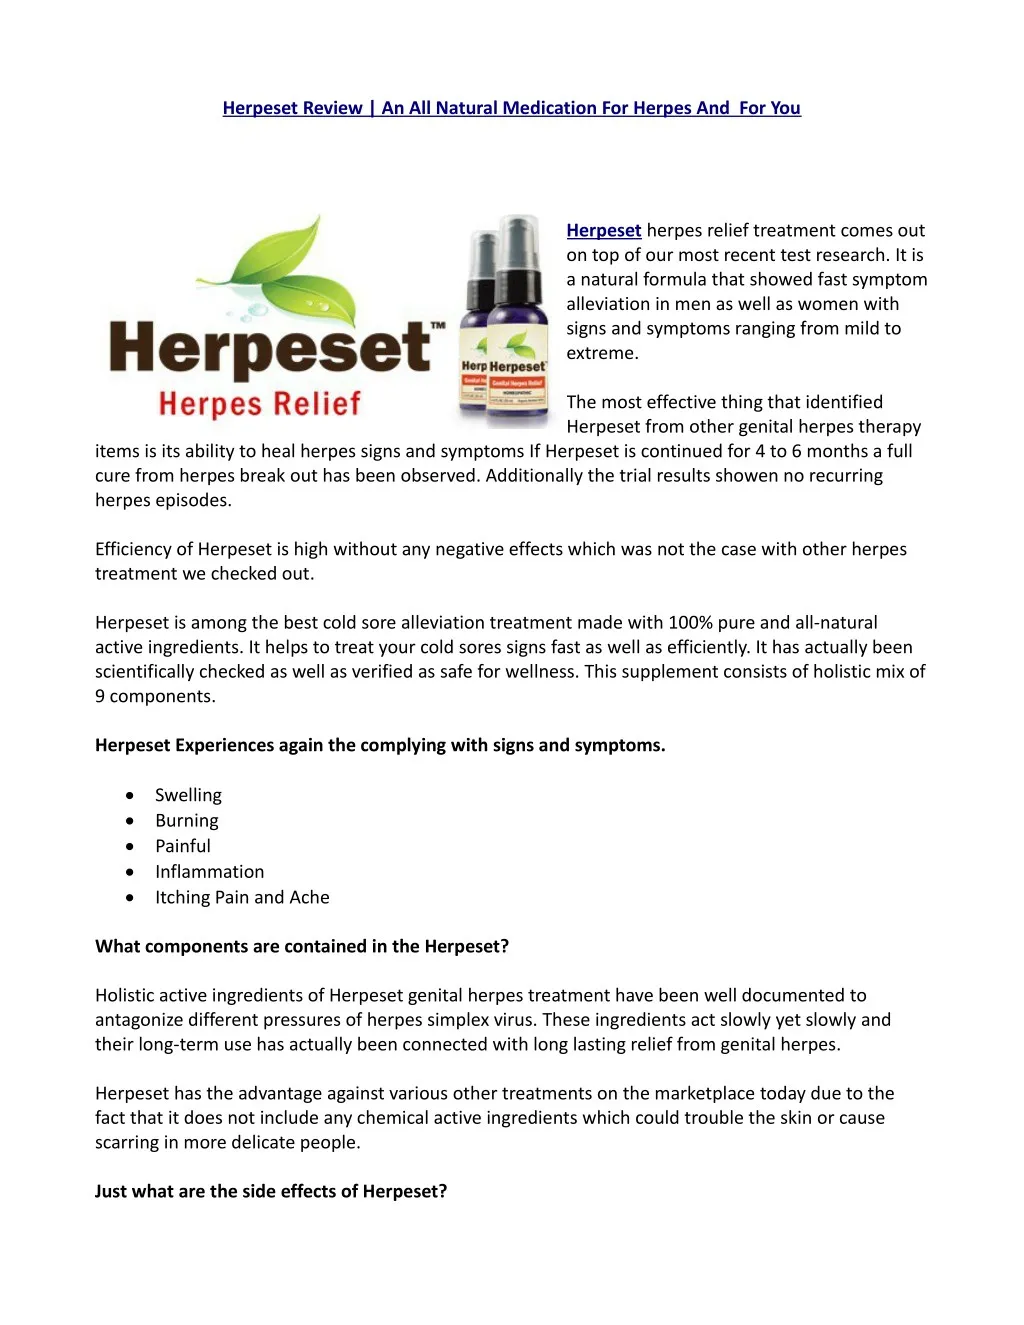 herpeset review an all natural medication